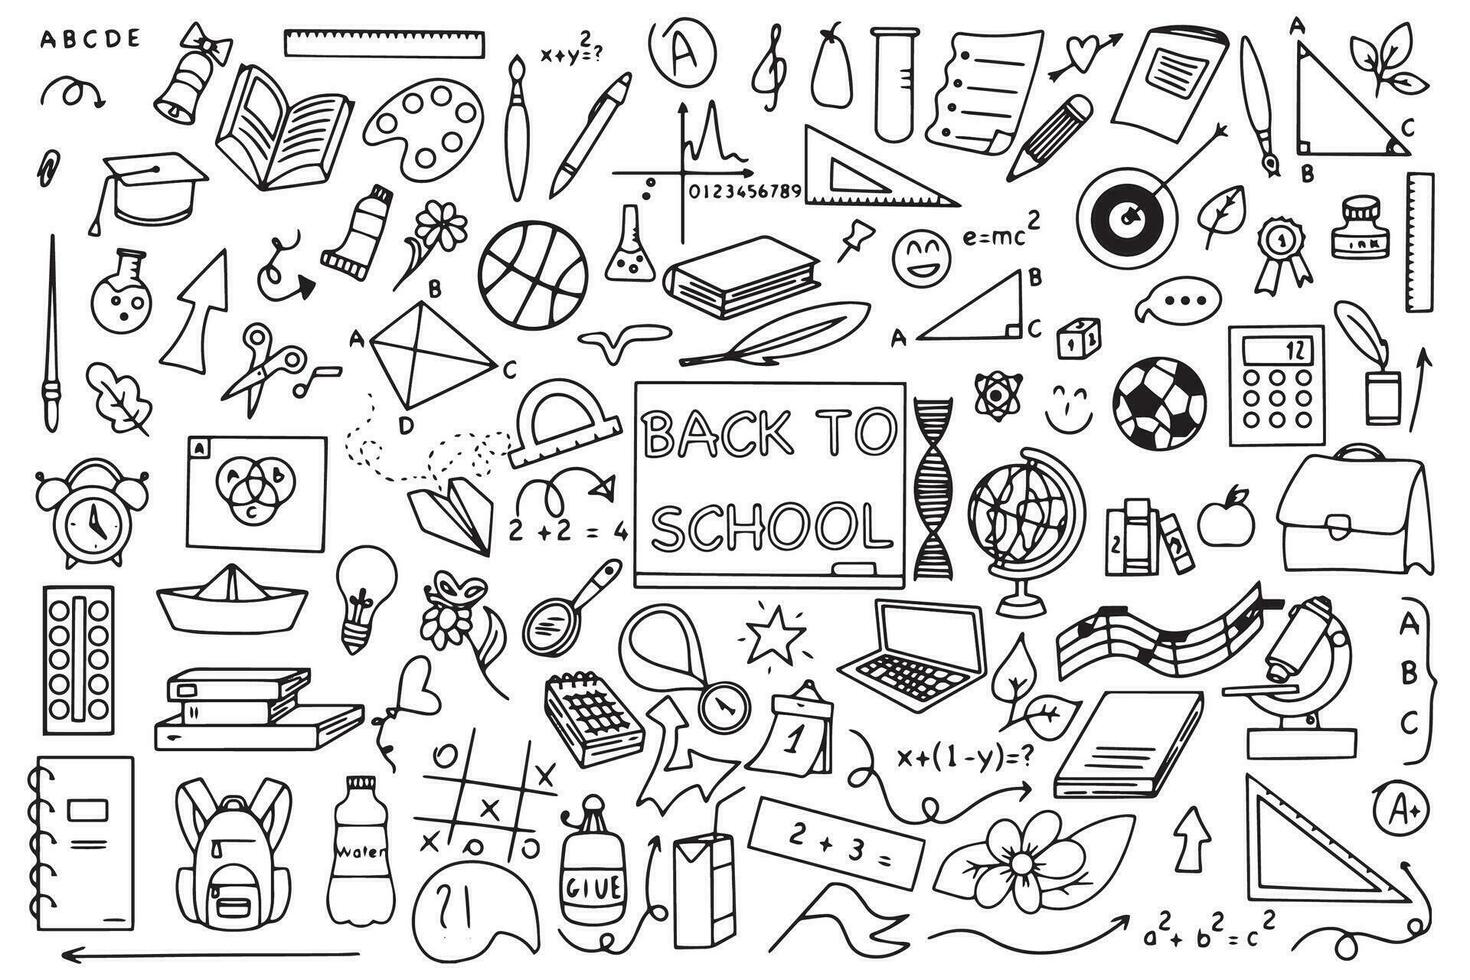 Background of school icons in doodle style. School education. Back to school doodle drawing. Vector